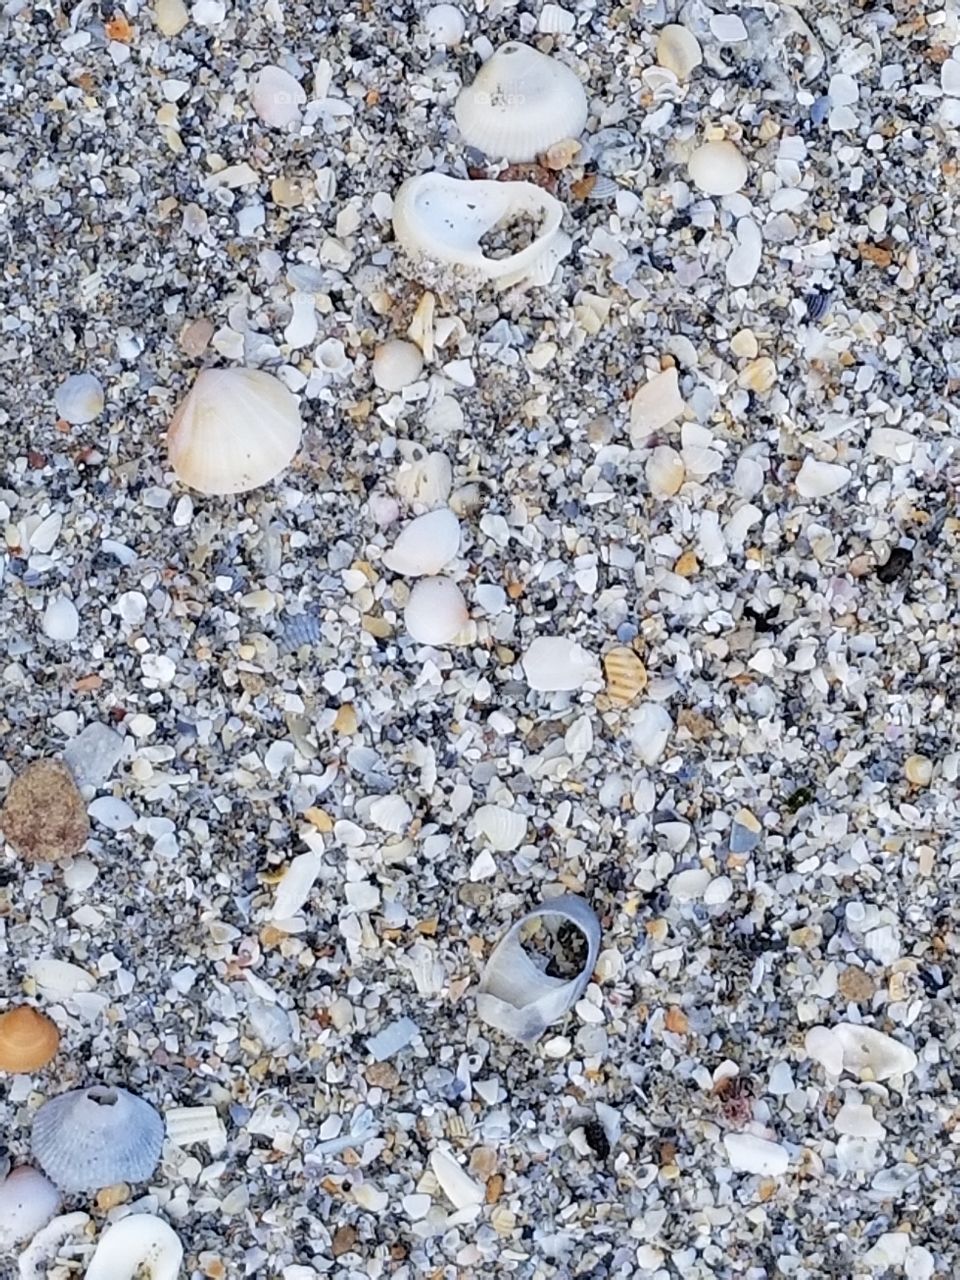 more pebbles and shells